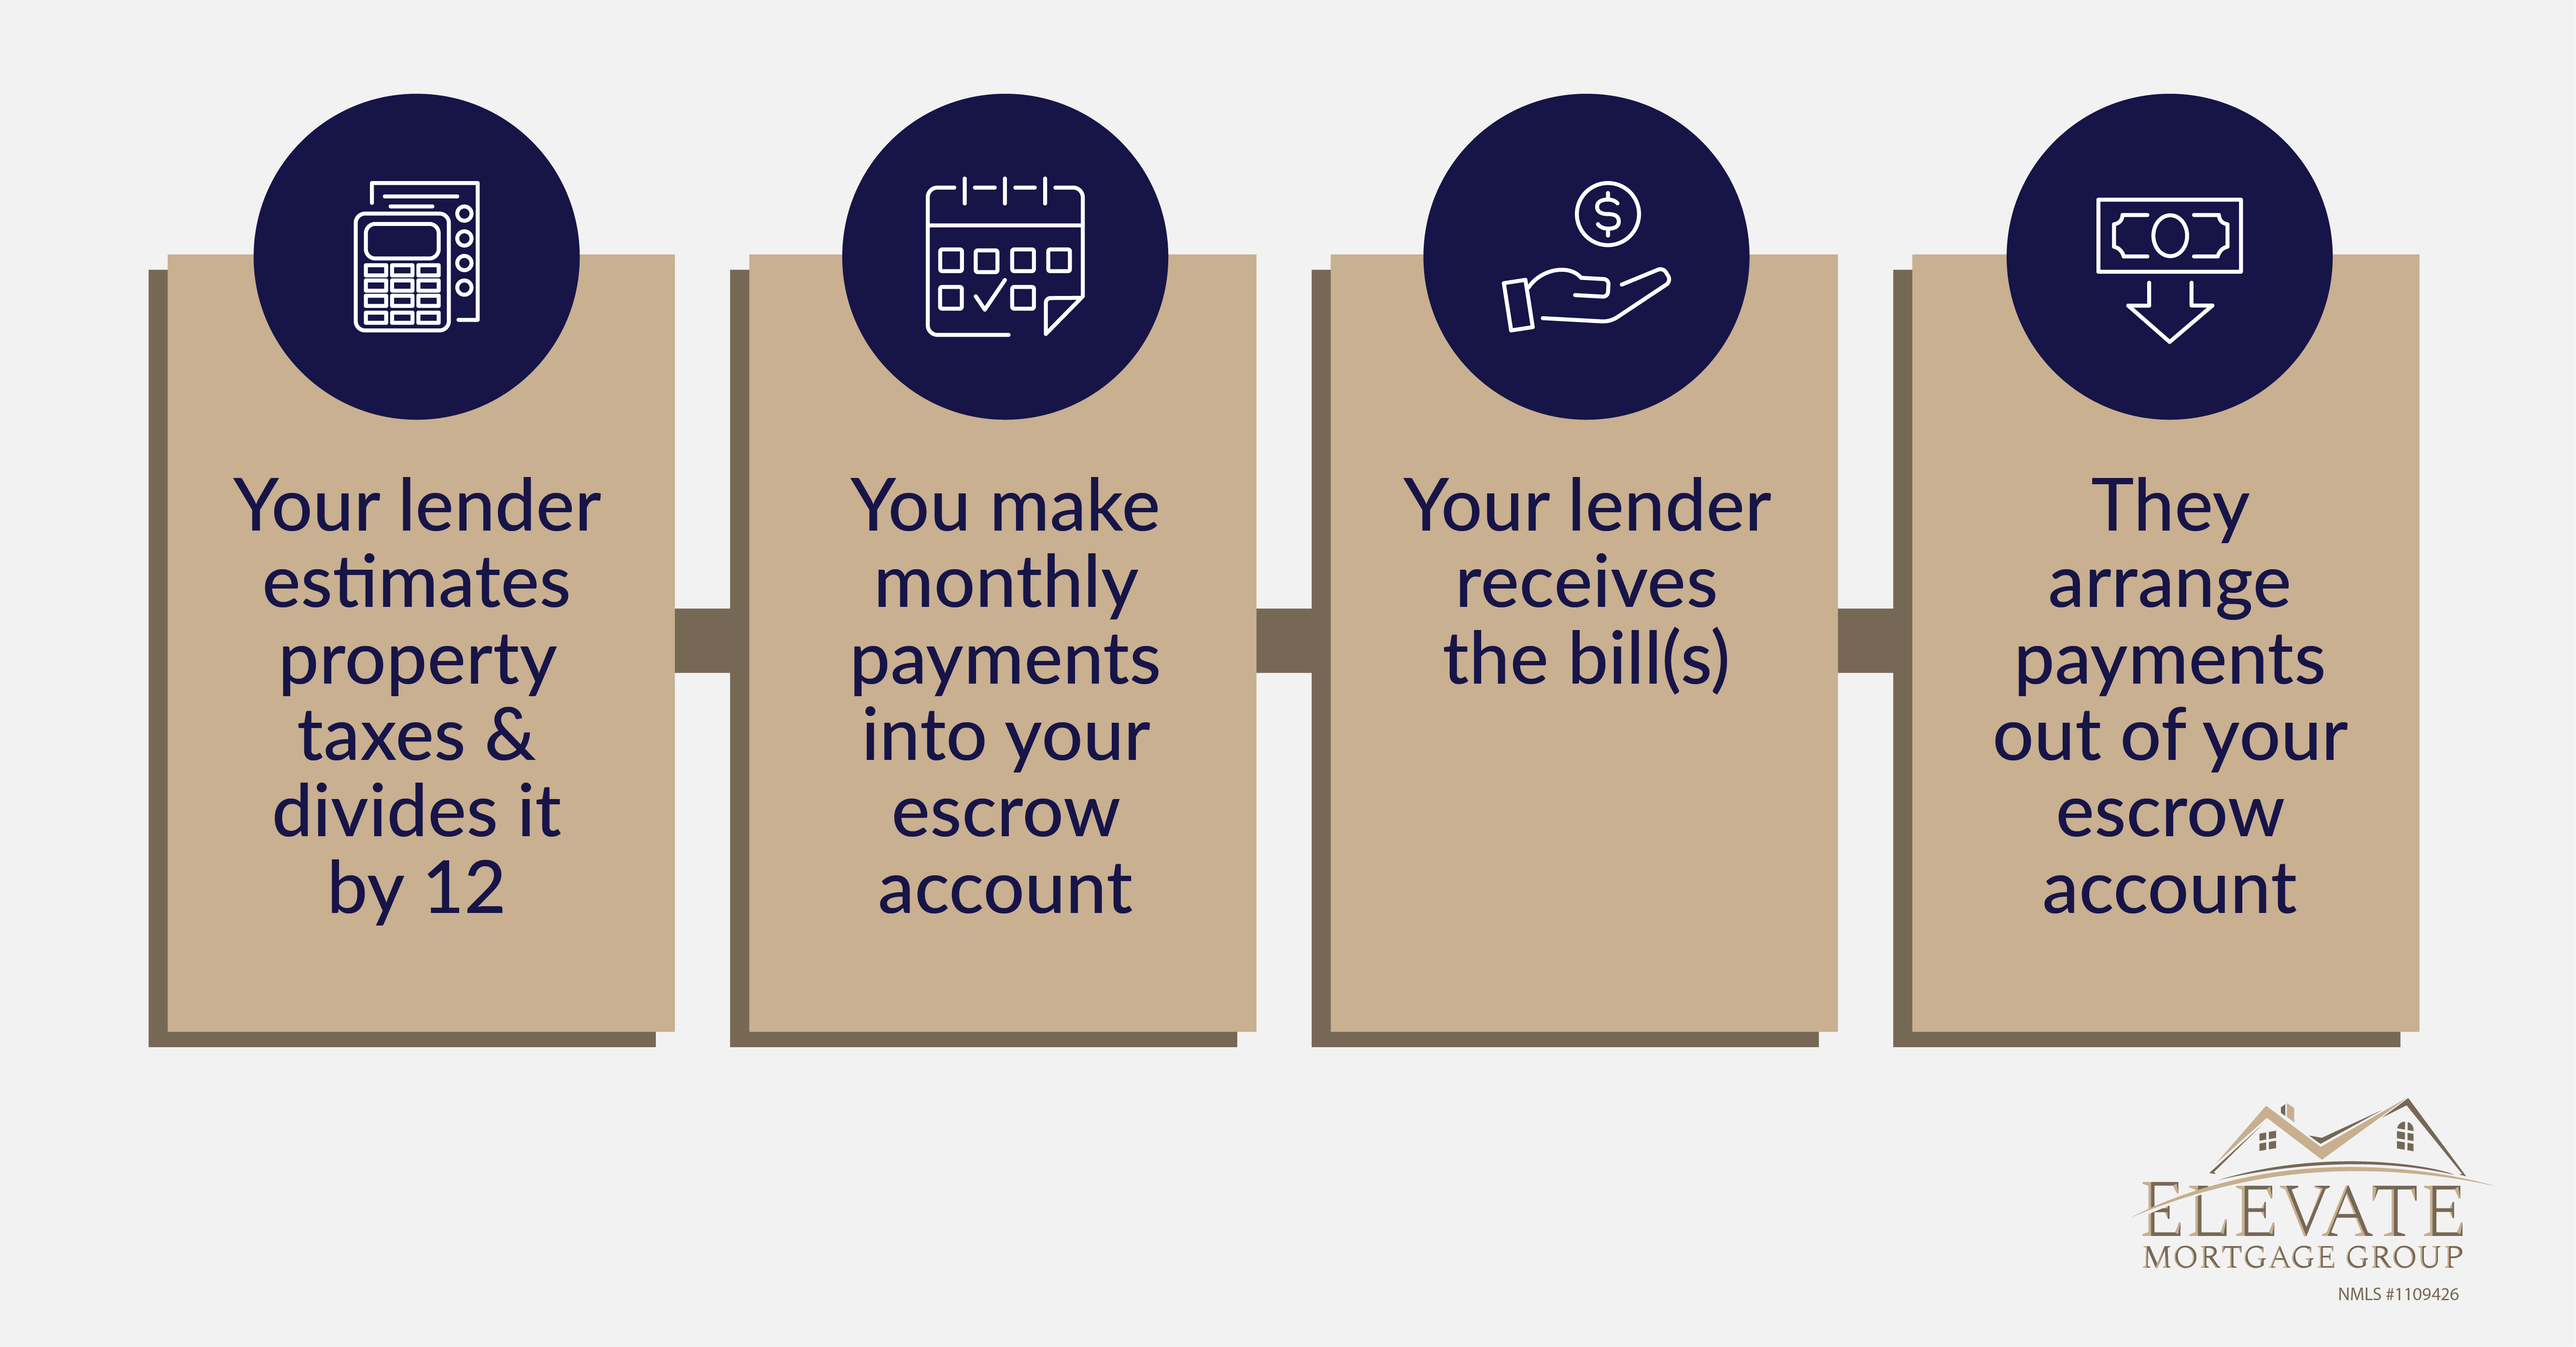 The process for how escrow is used to pay your homeowners insurance and property taxes